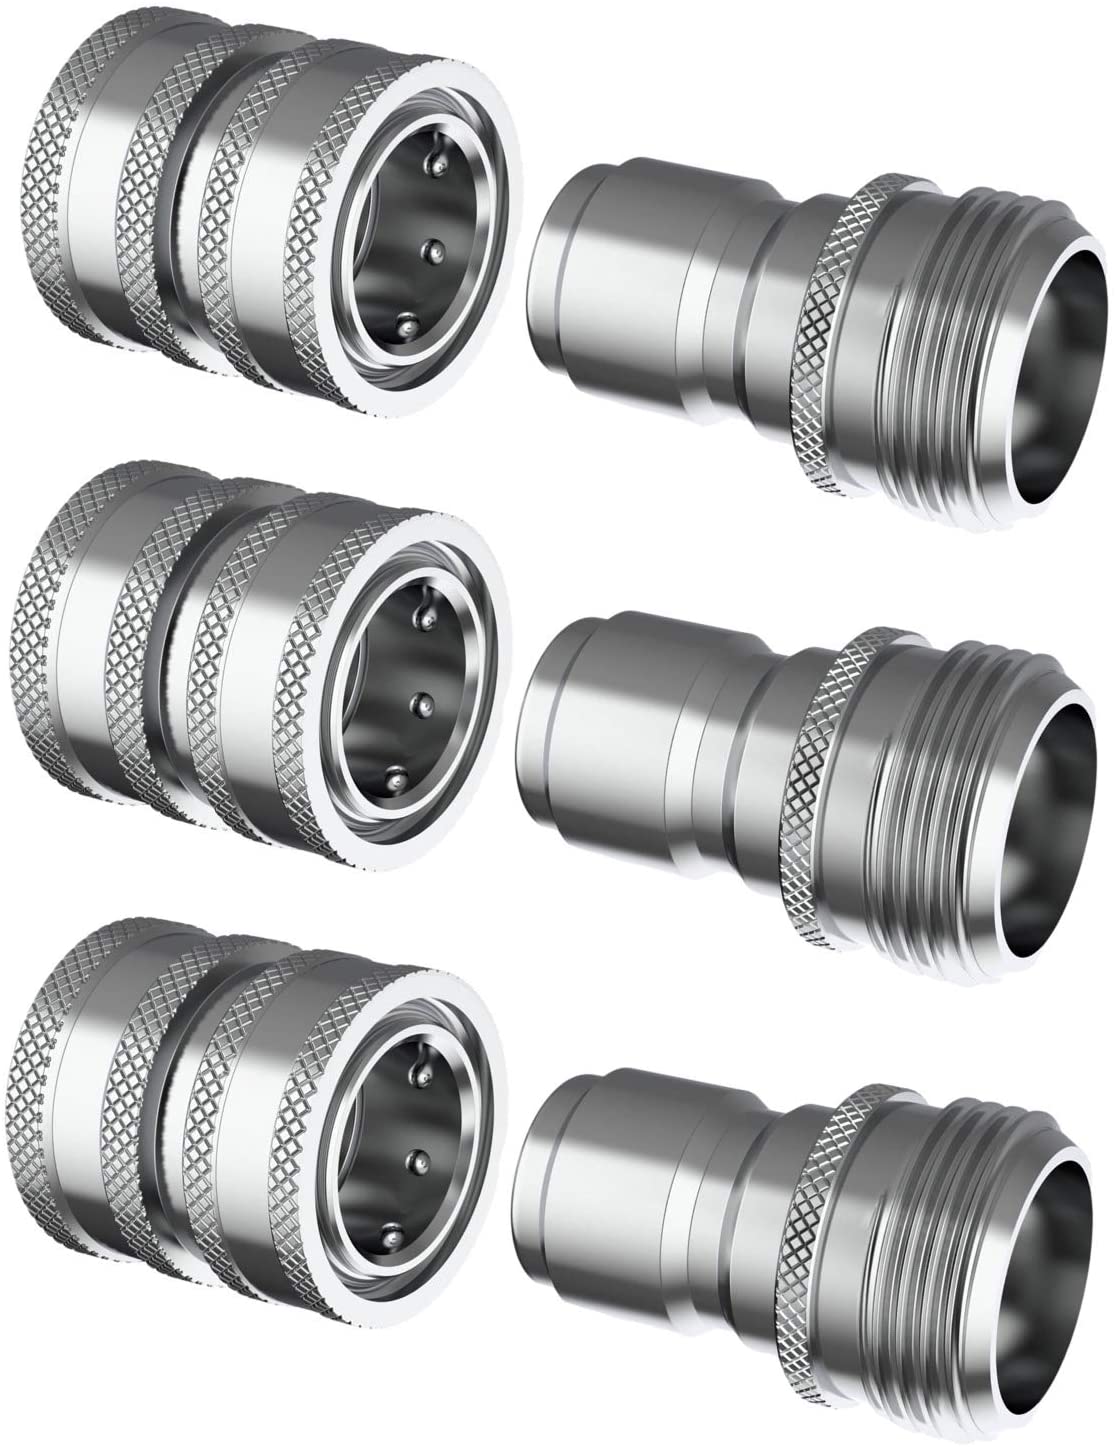 Garden Hose Quick Connect Set | Solid Stainless Steel 3/4" Quick Connect Garden Hose Fittings | 3x3